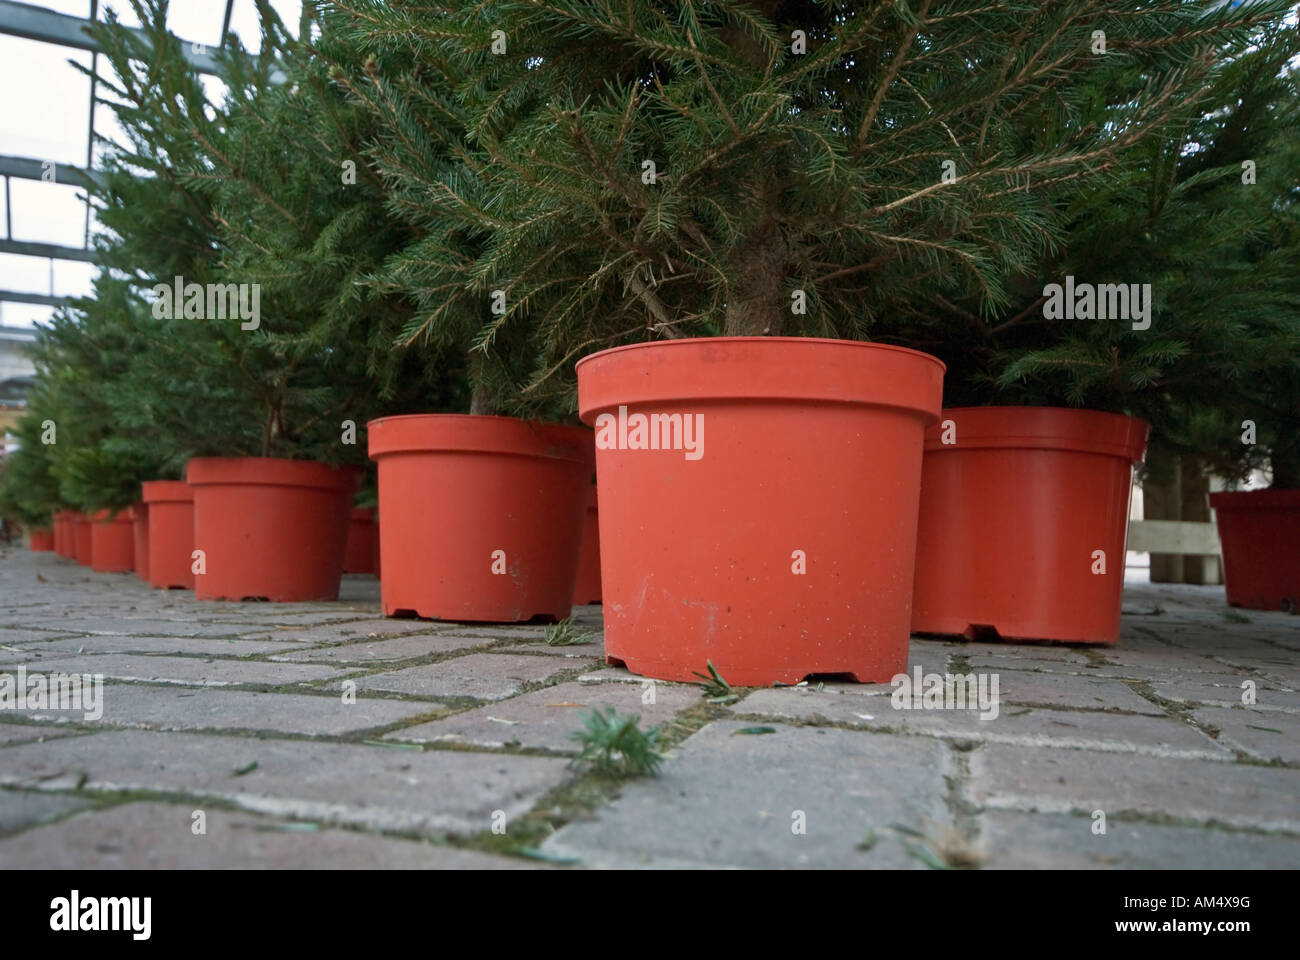 Norwegian spruce Christmas trees red pots Stock Photo